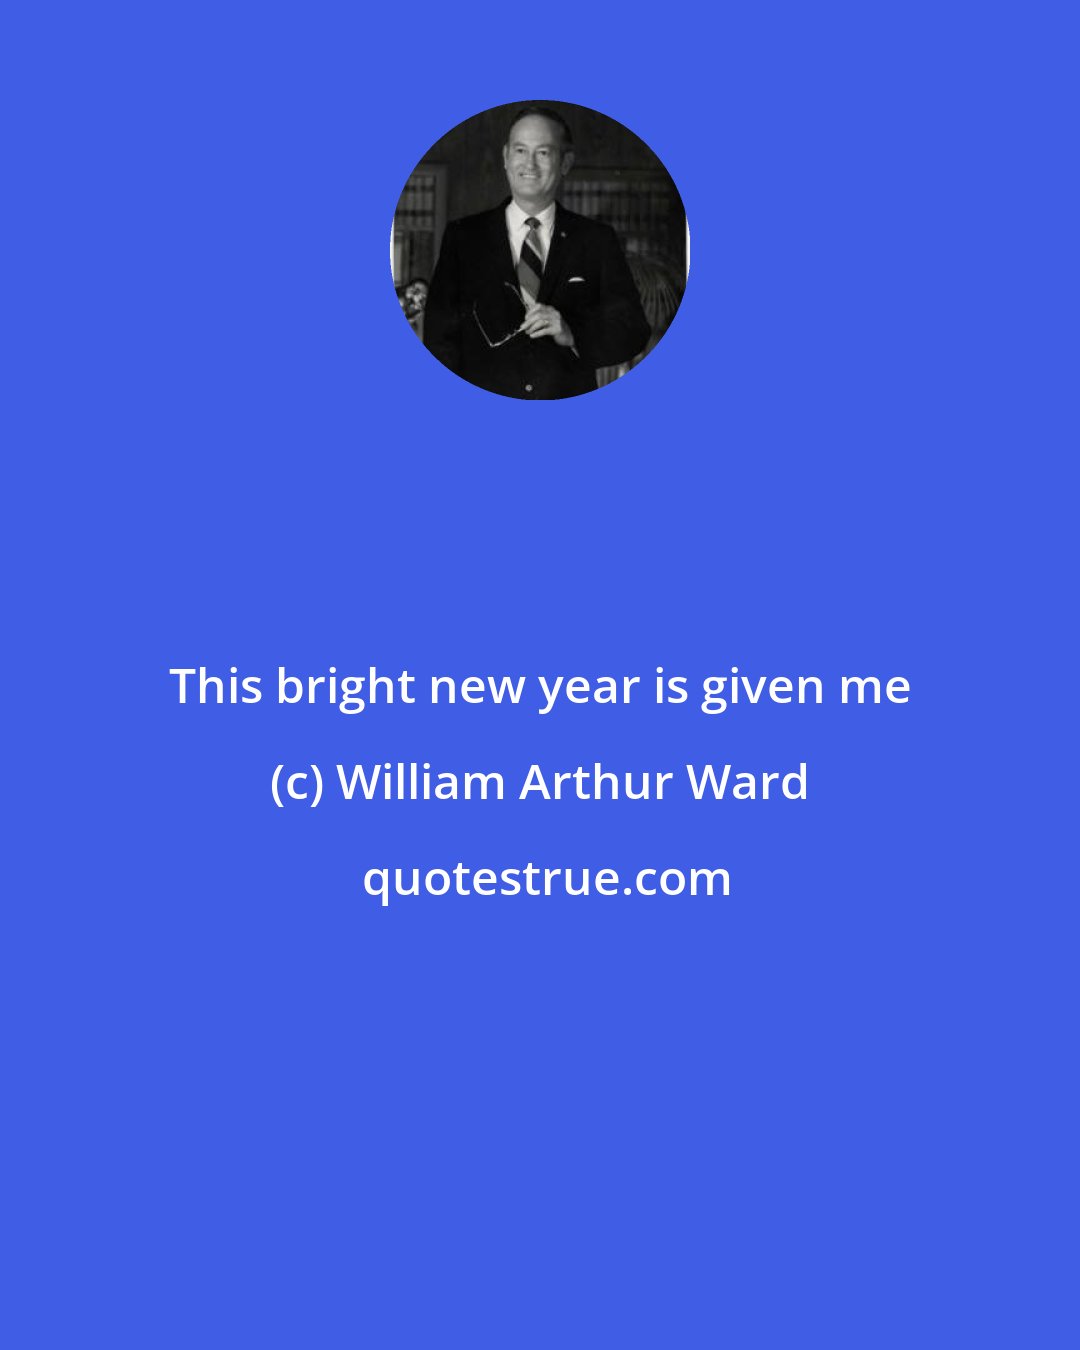 William Arthur Ward: This bright new year is given me